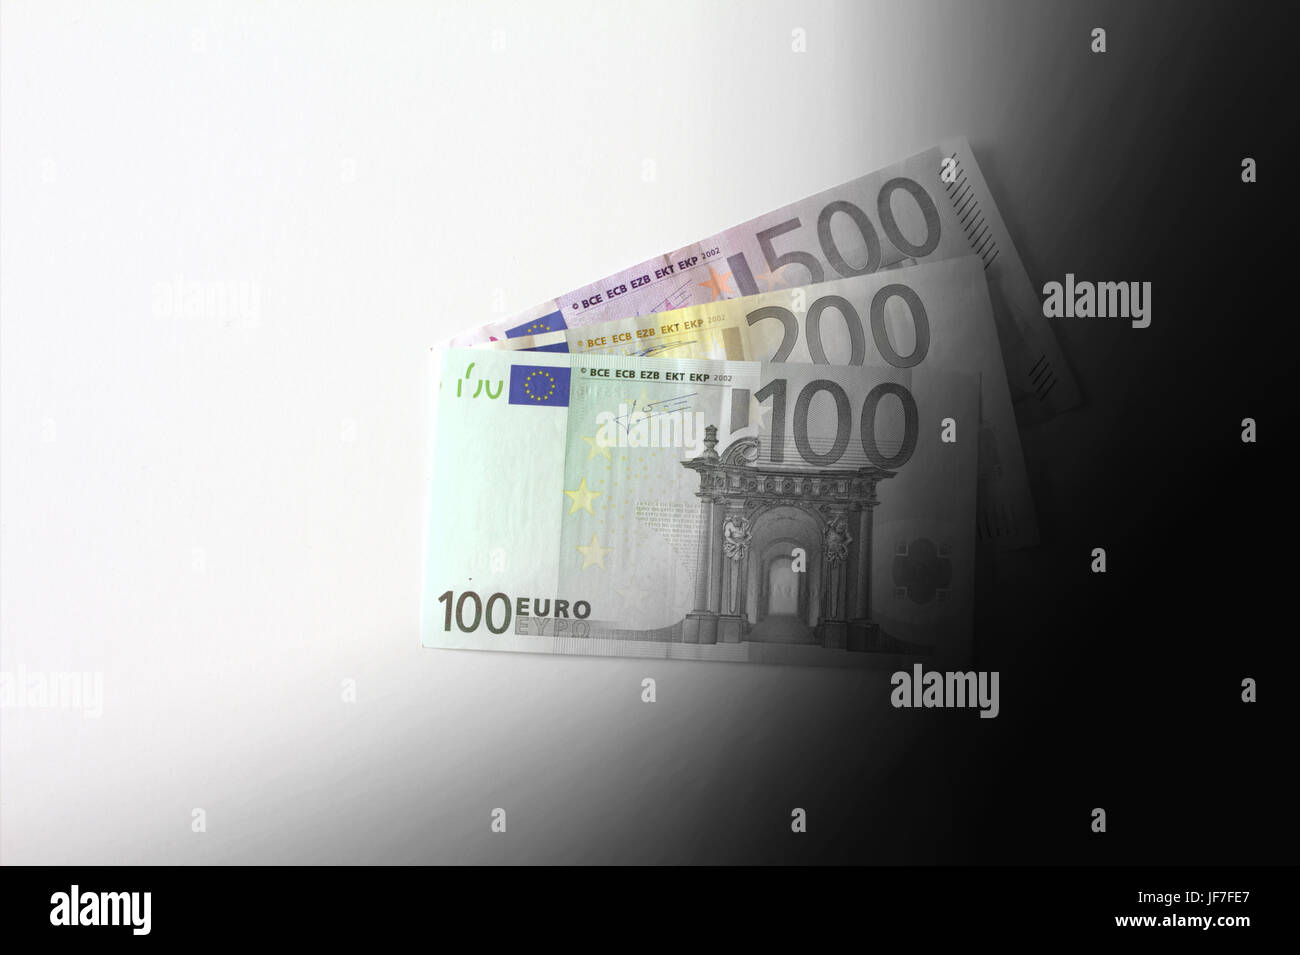 Euro banknotes disappearing into black, dirty earnings concept, copy space Stock Photo